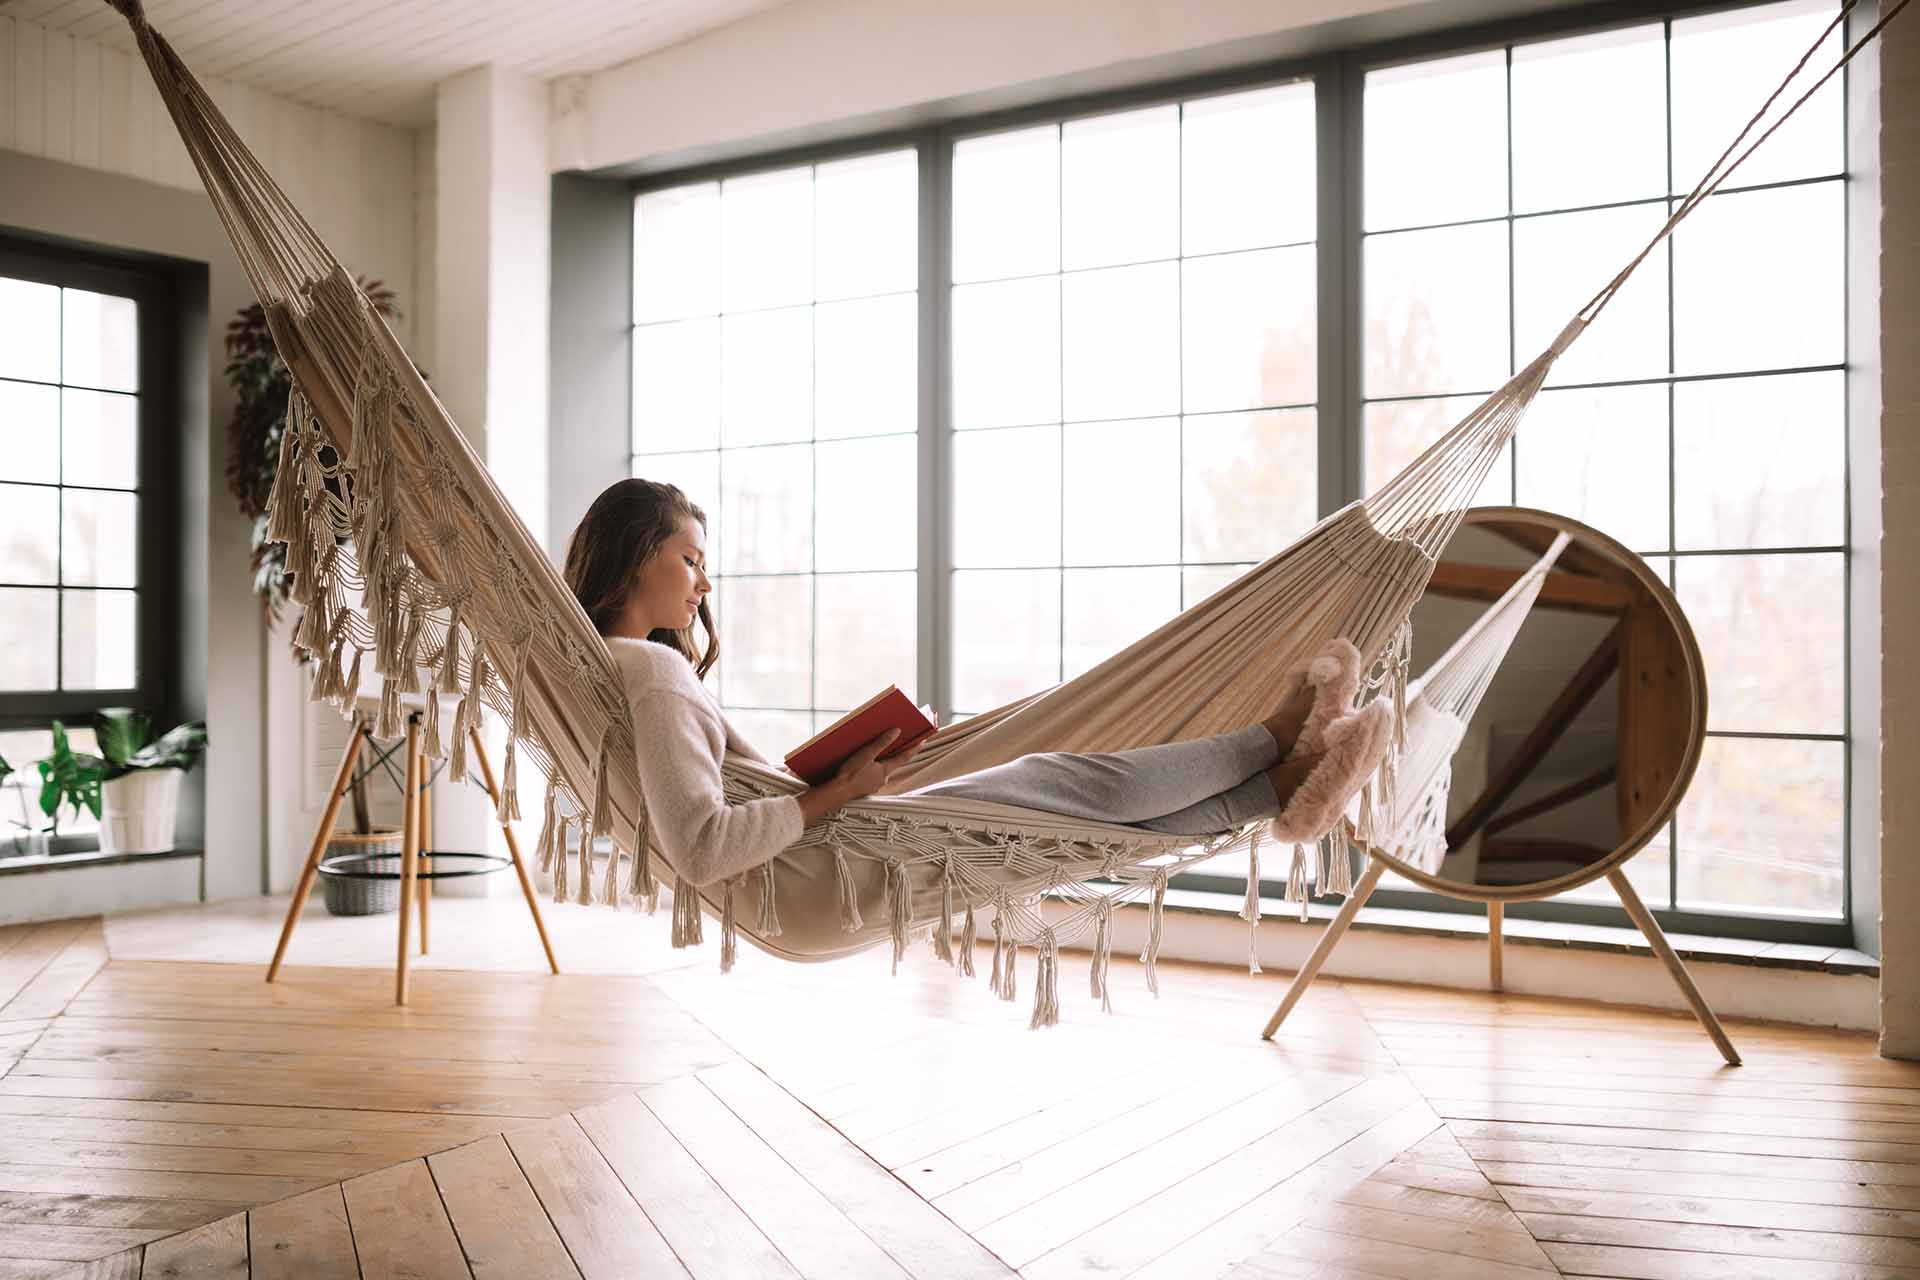 How To Hang Hammock From The Ceiling